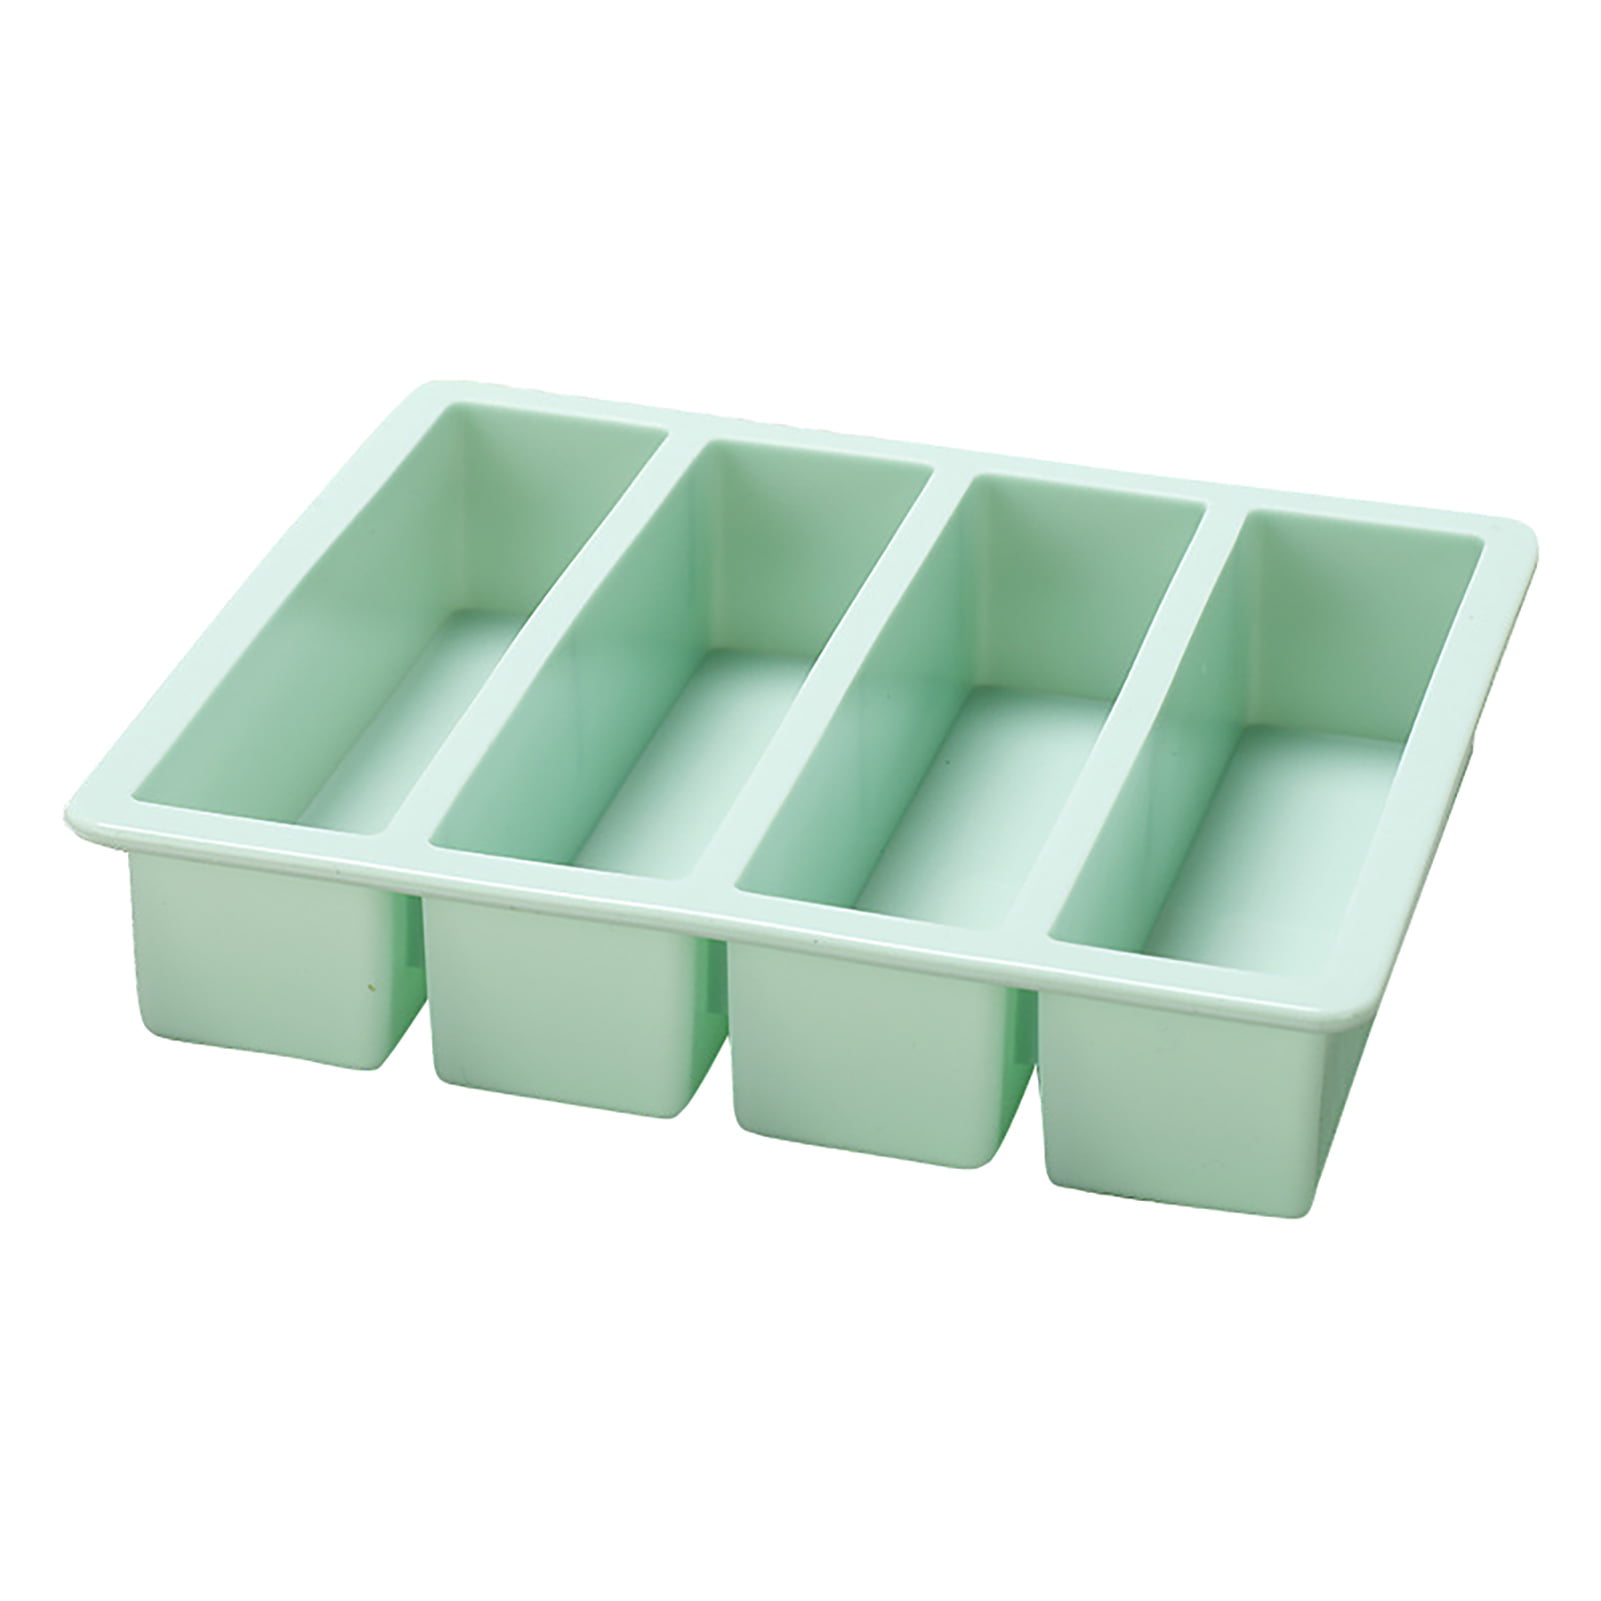 Flexible Silicone Ice Cube Trays 4 / 6 / 8 Square Cubes per Tray